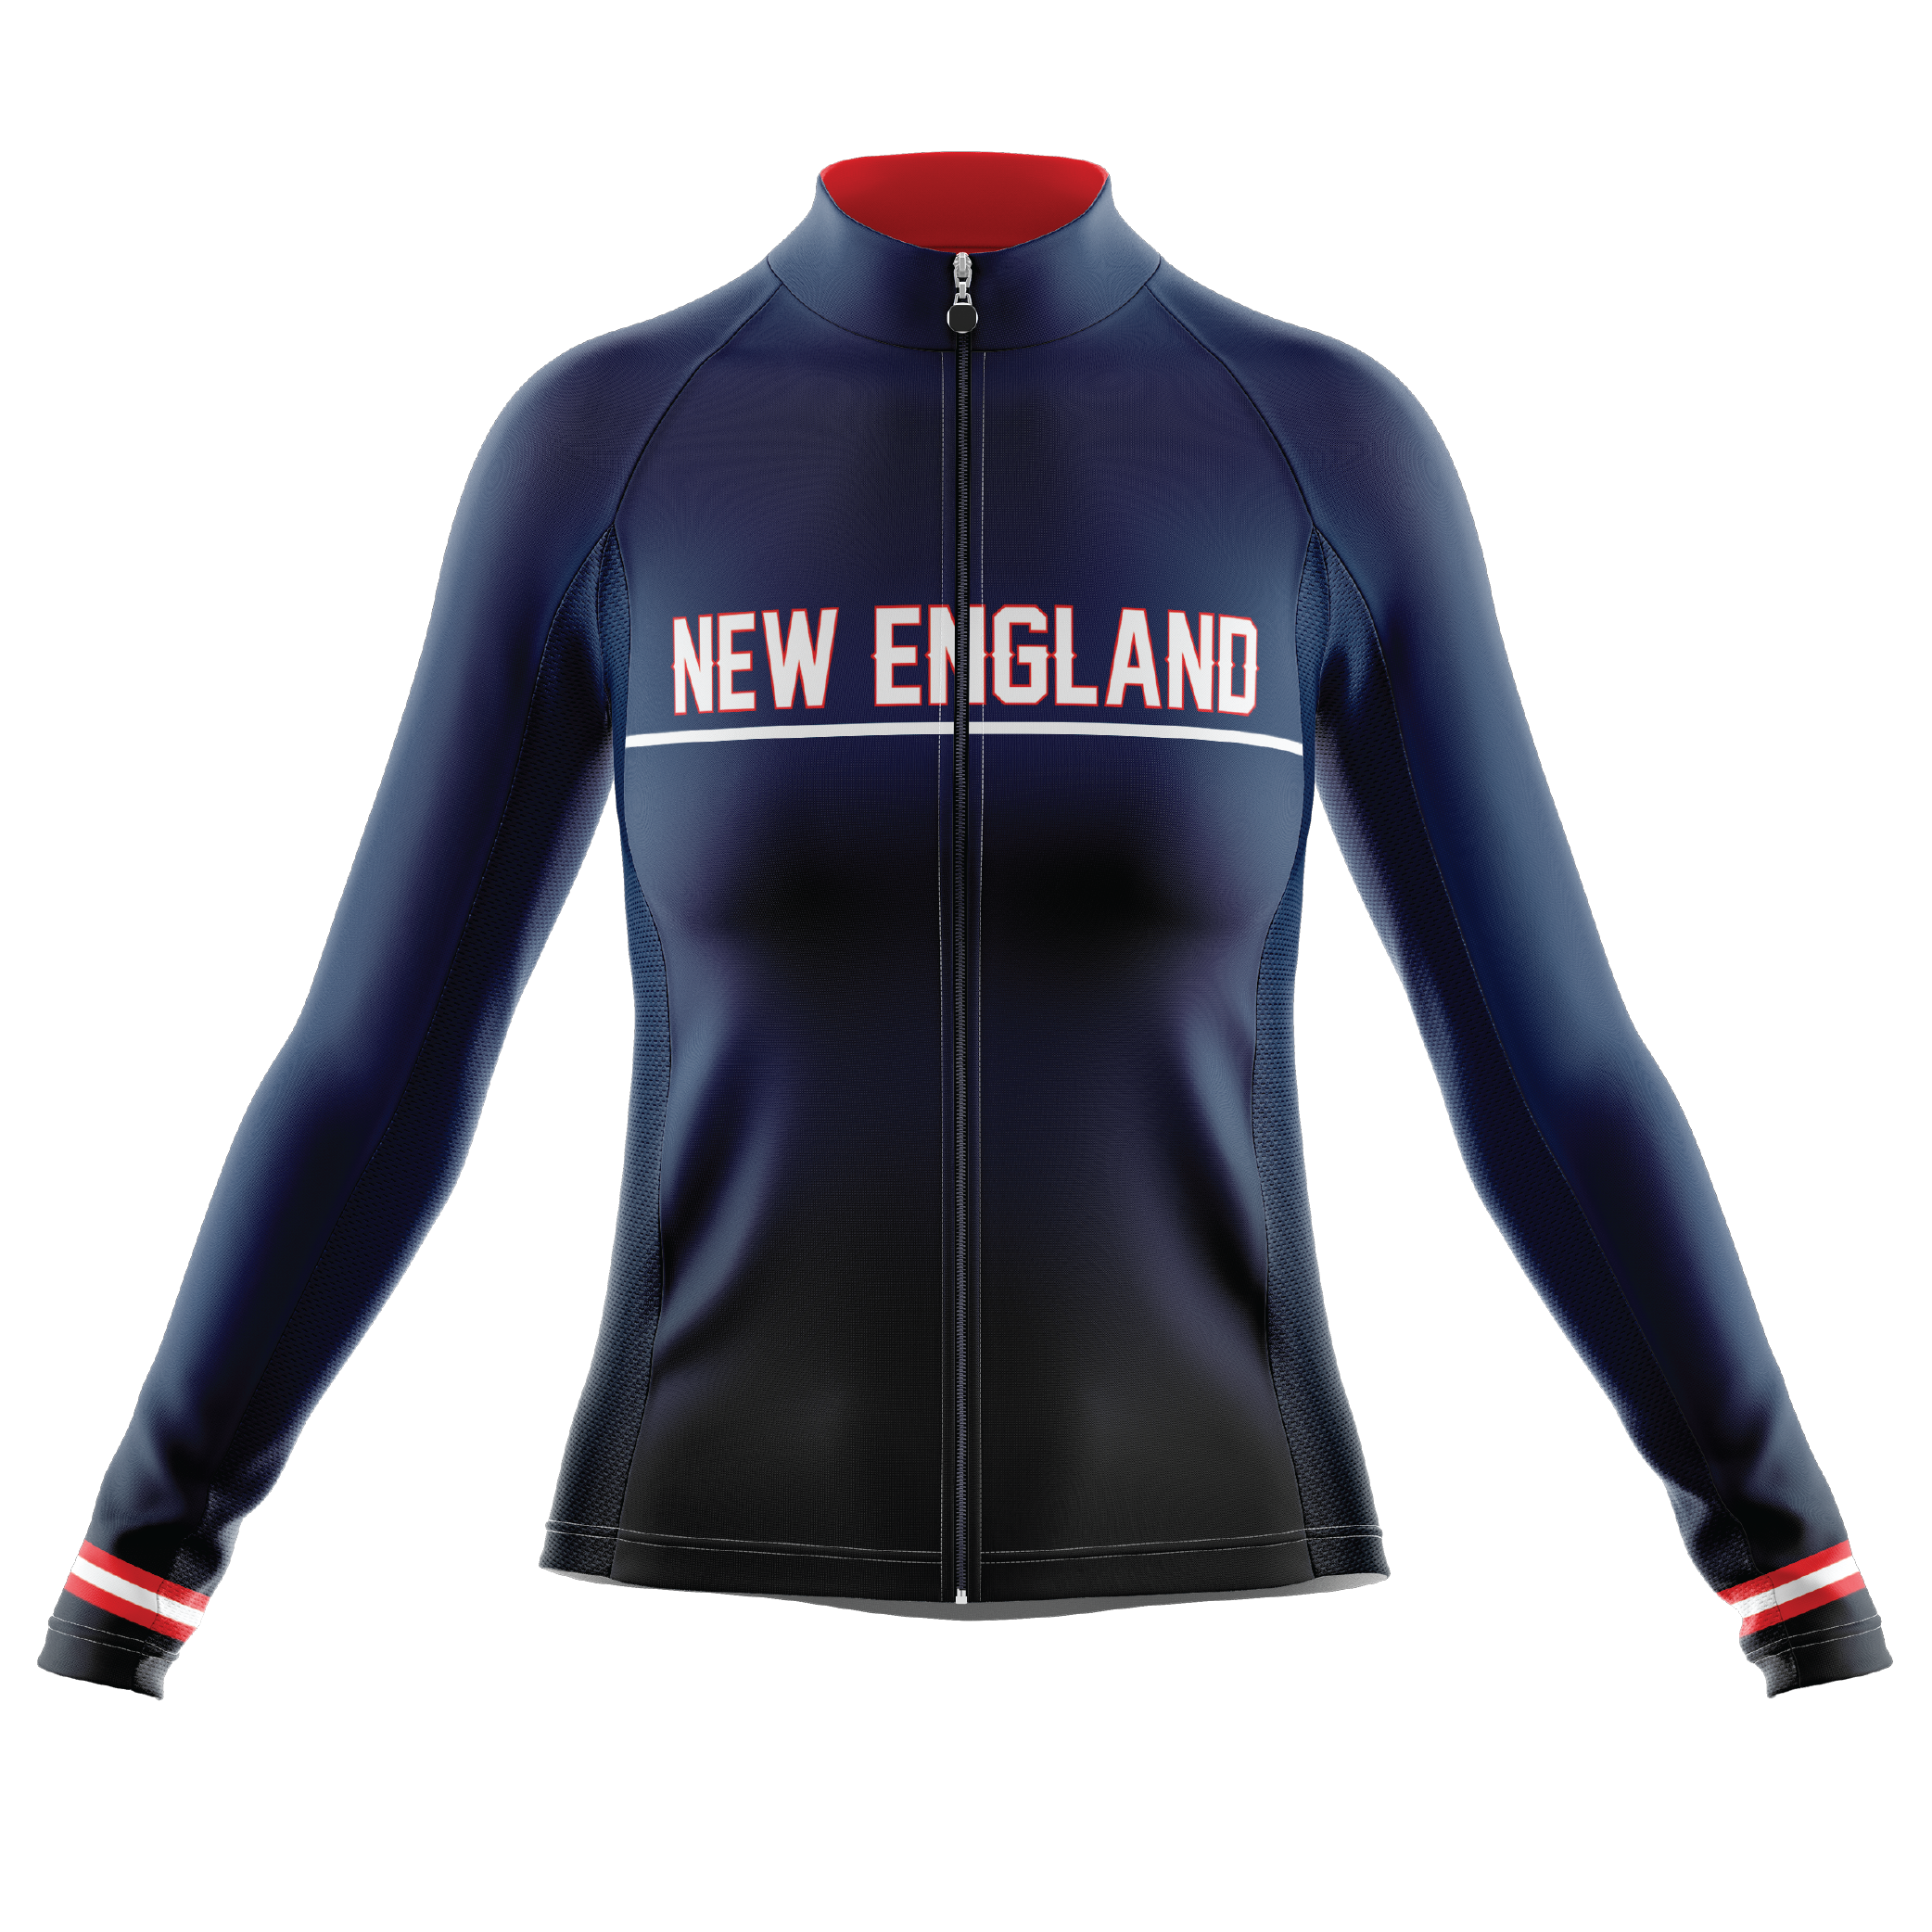 New England Long Sleeve Cycling Jersey